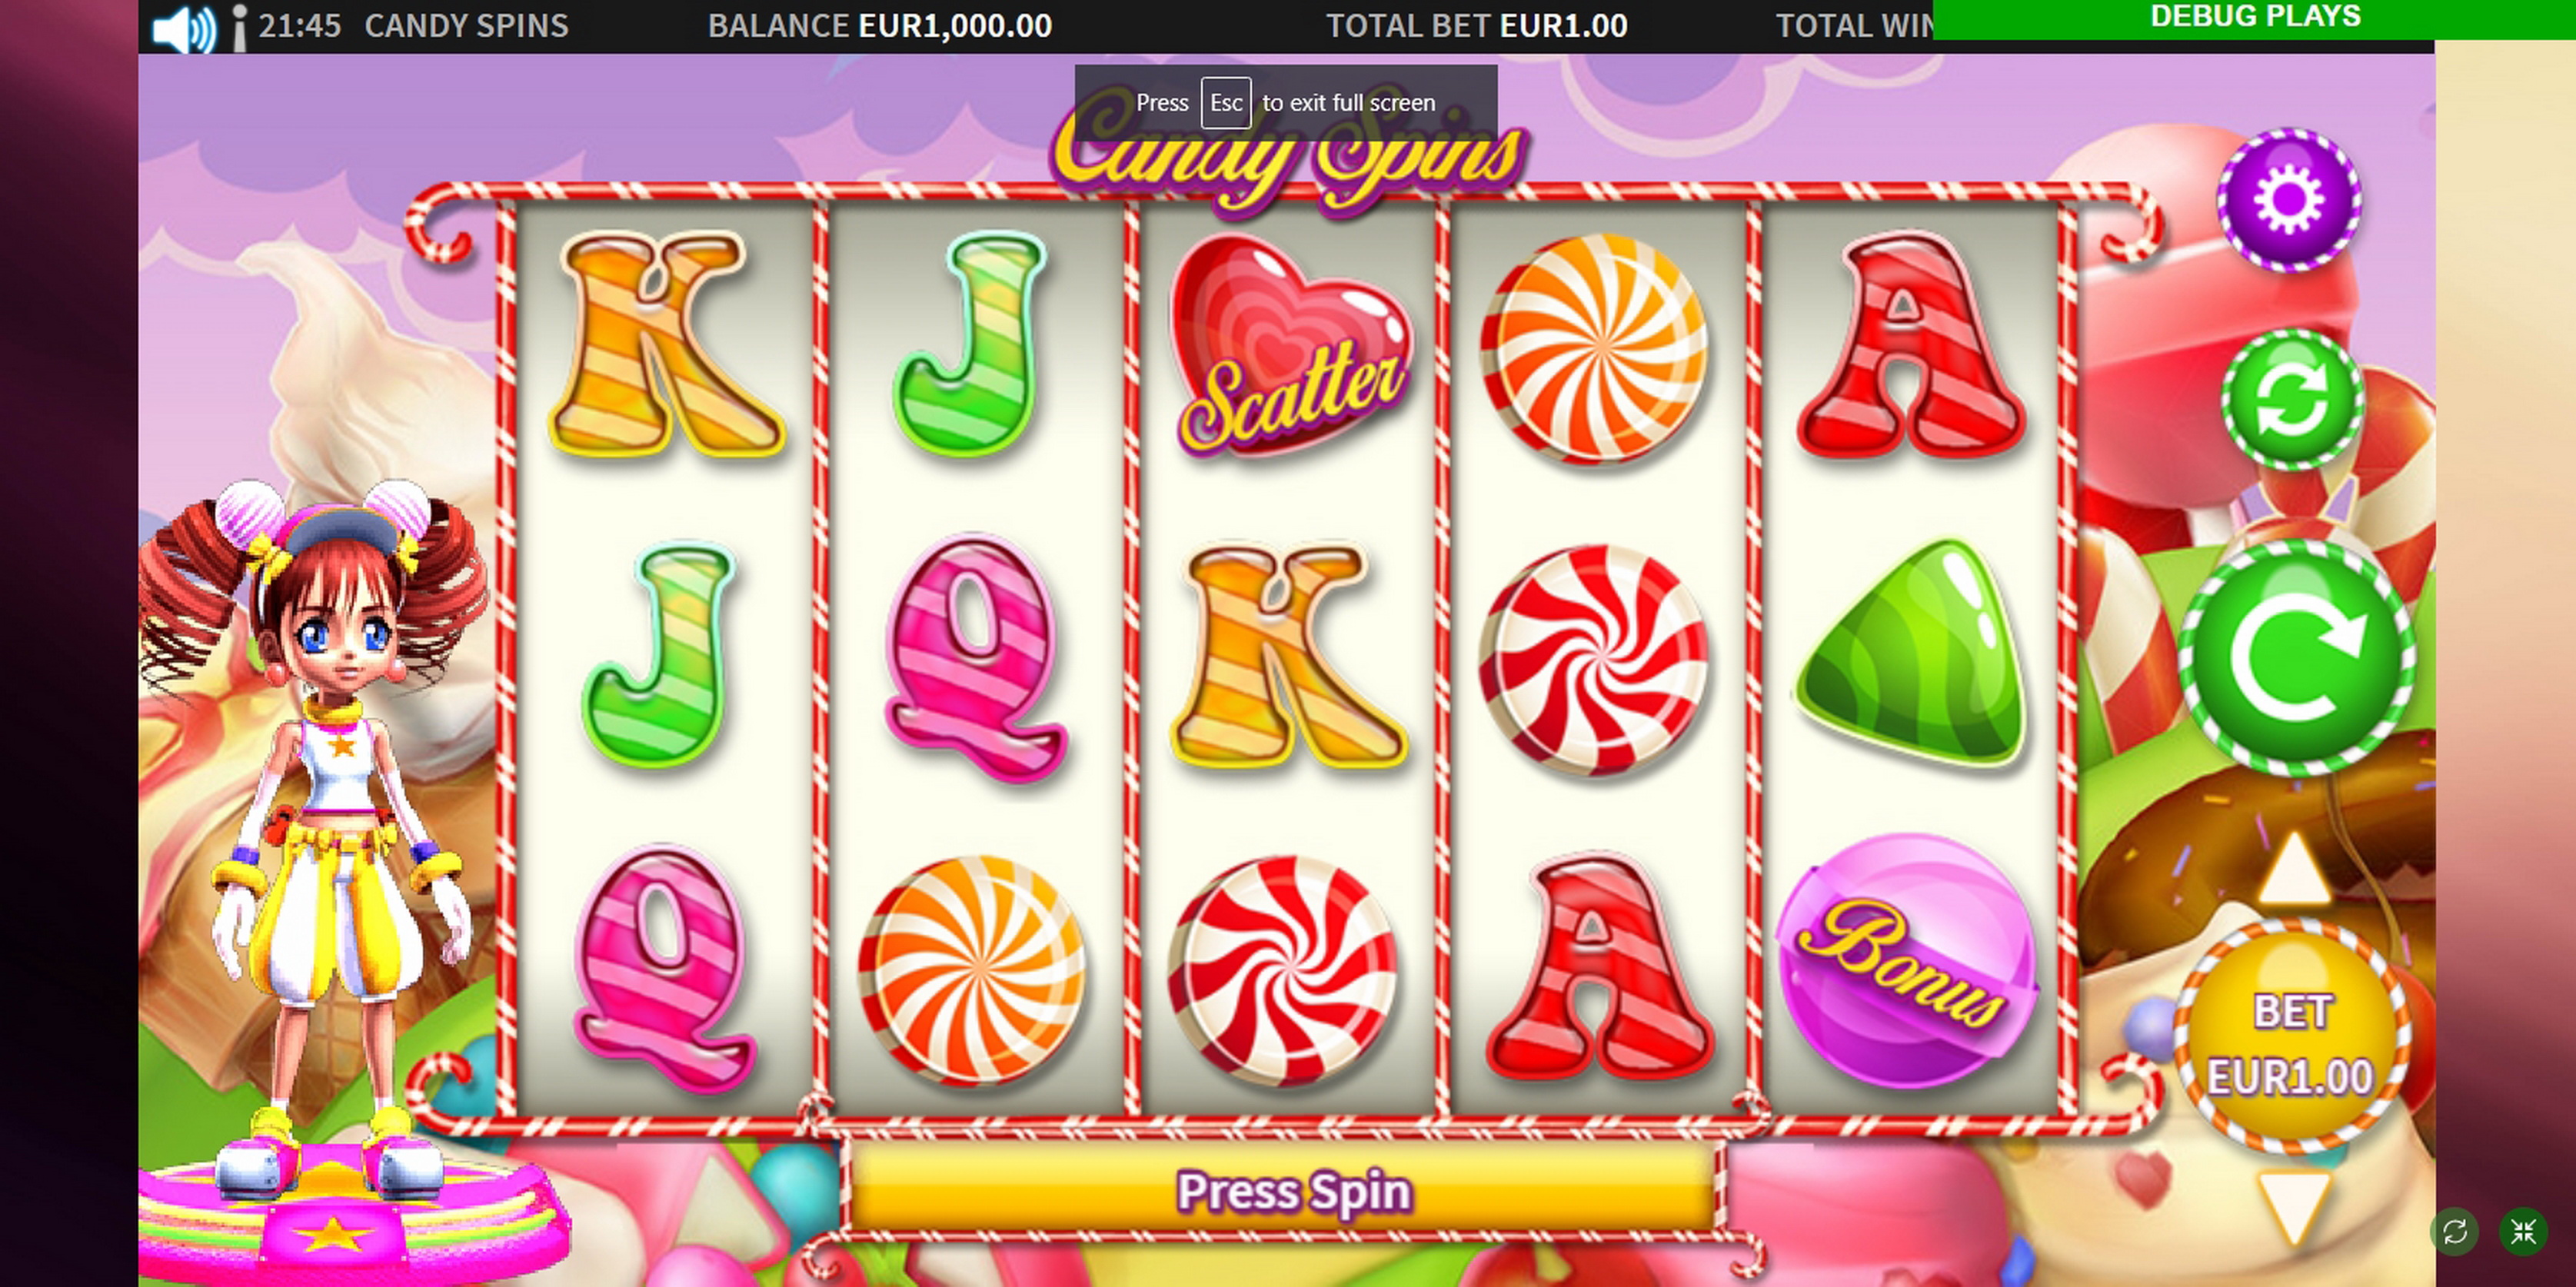 Reels in Candy Spins Slot Game by MetaGU